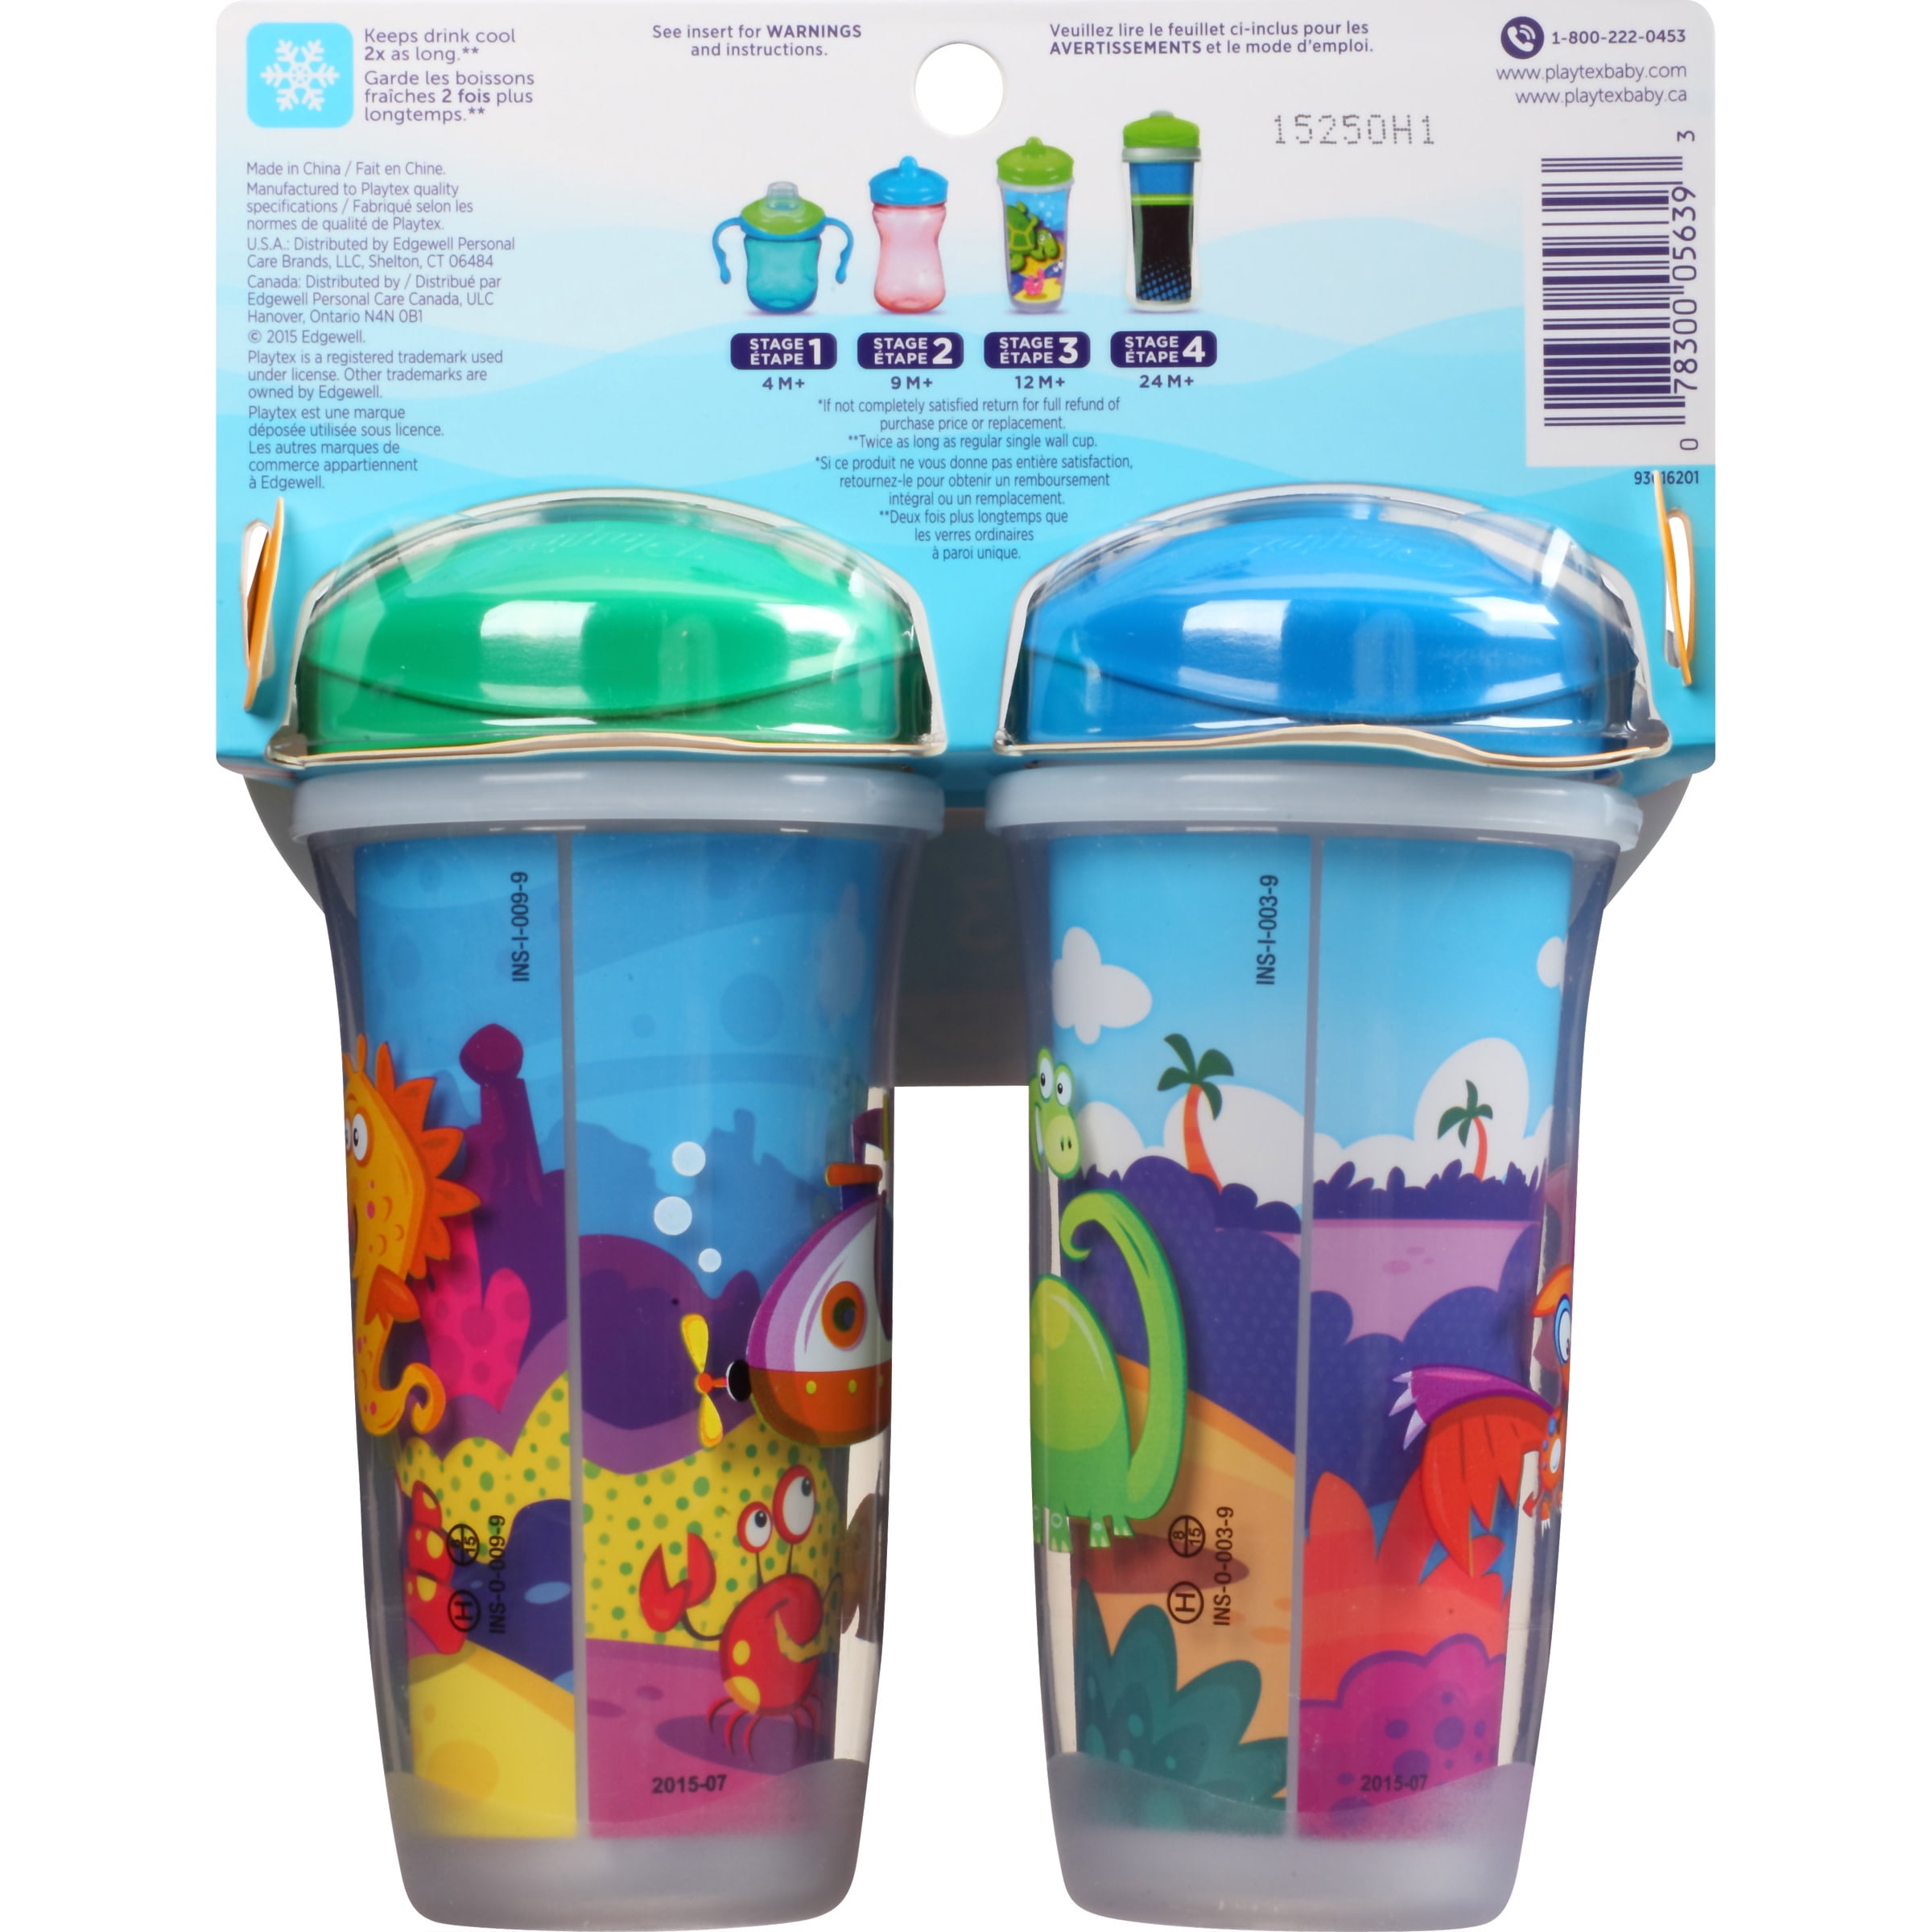 Playtex Spout Cup, Spill-Proof, Insulated, Stage 3 (12 Months+) 1 ea, Bottles and Cups